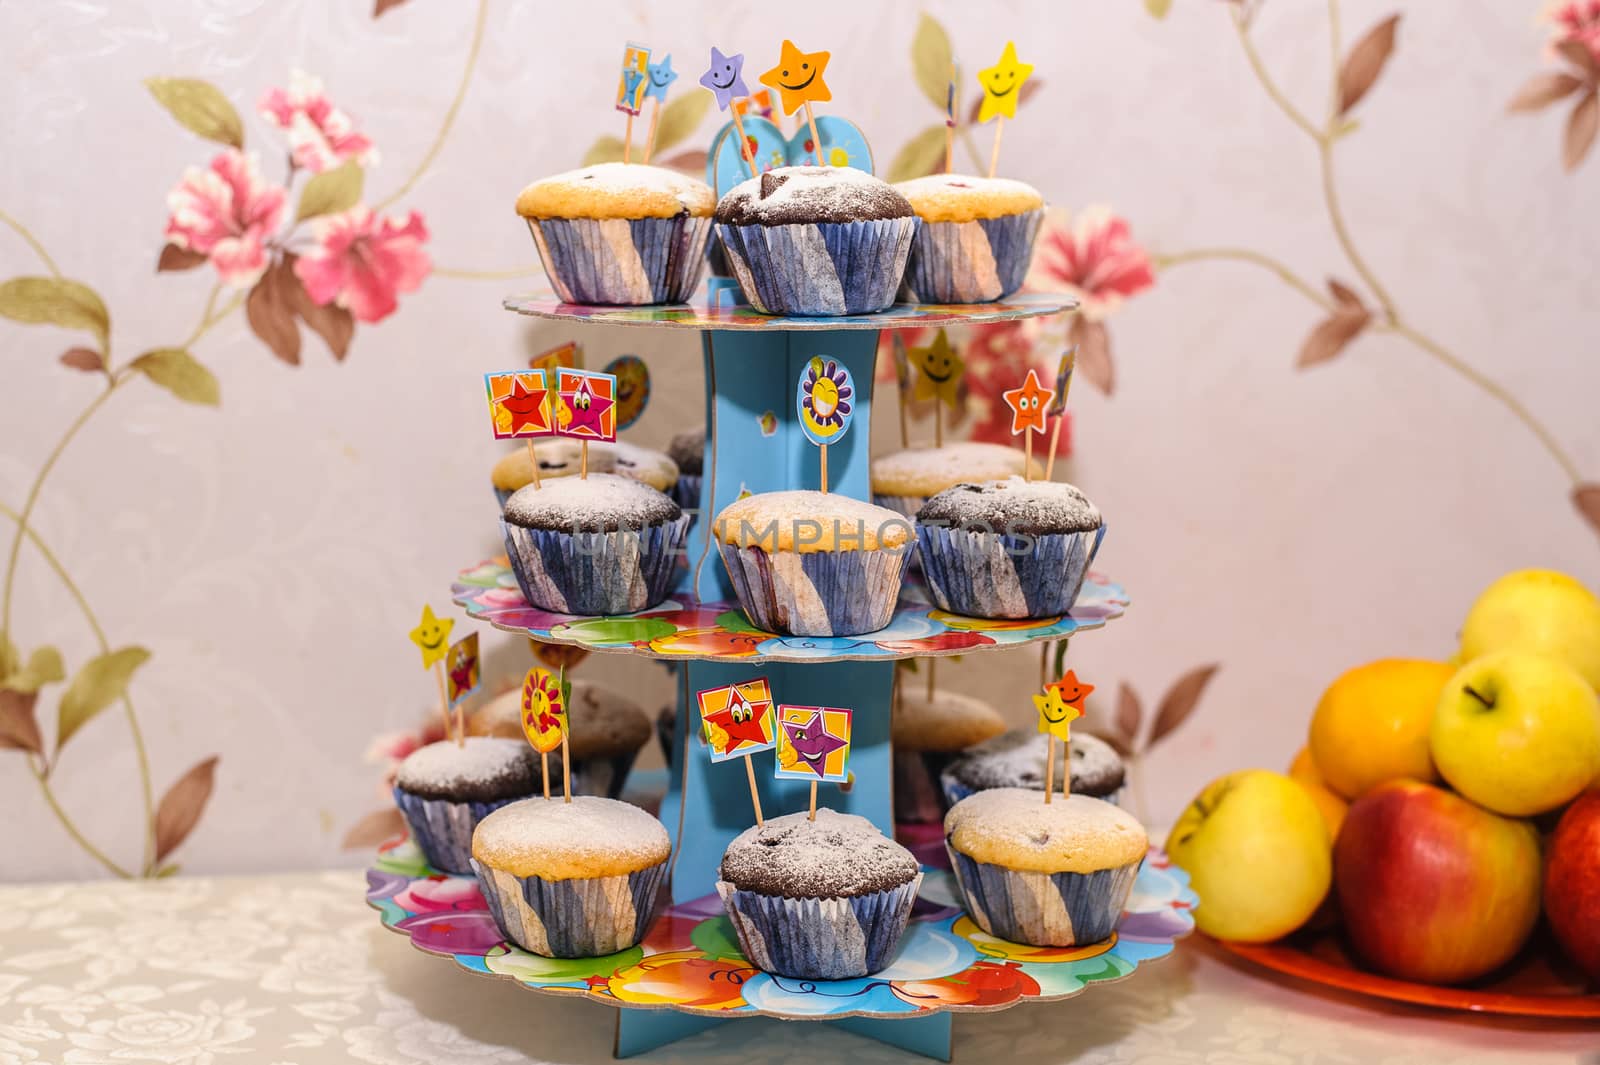 holiday cupcakes with funny flags and a plate with apples on the table by chernobrovin